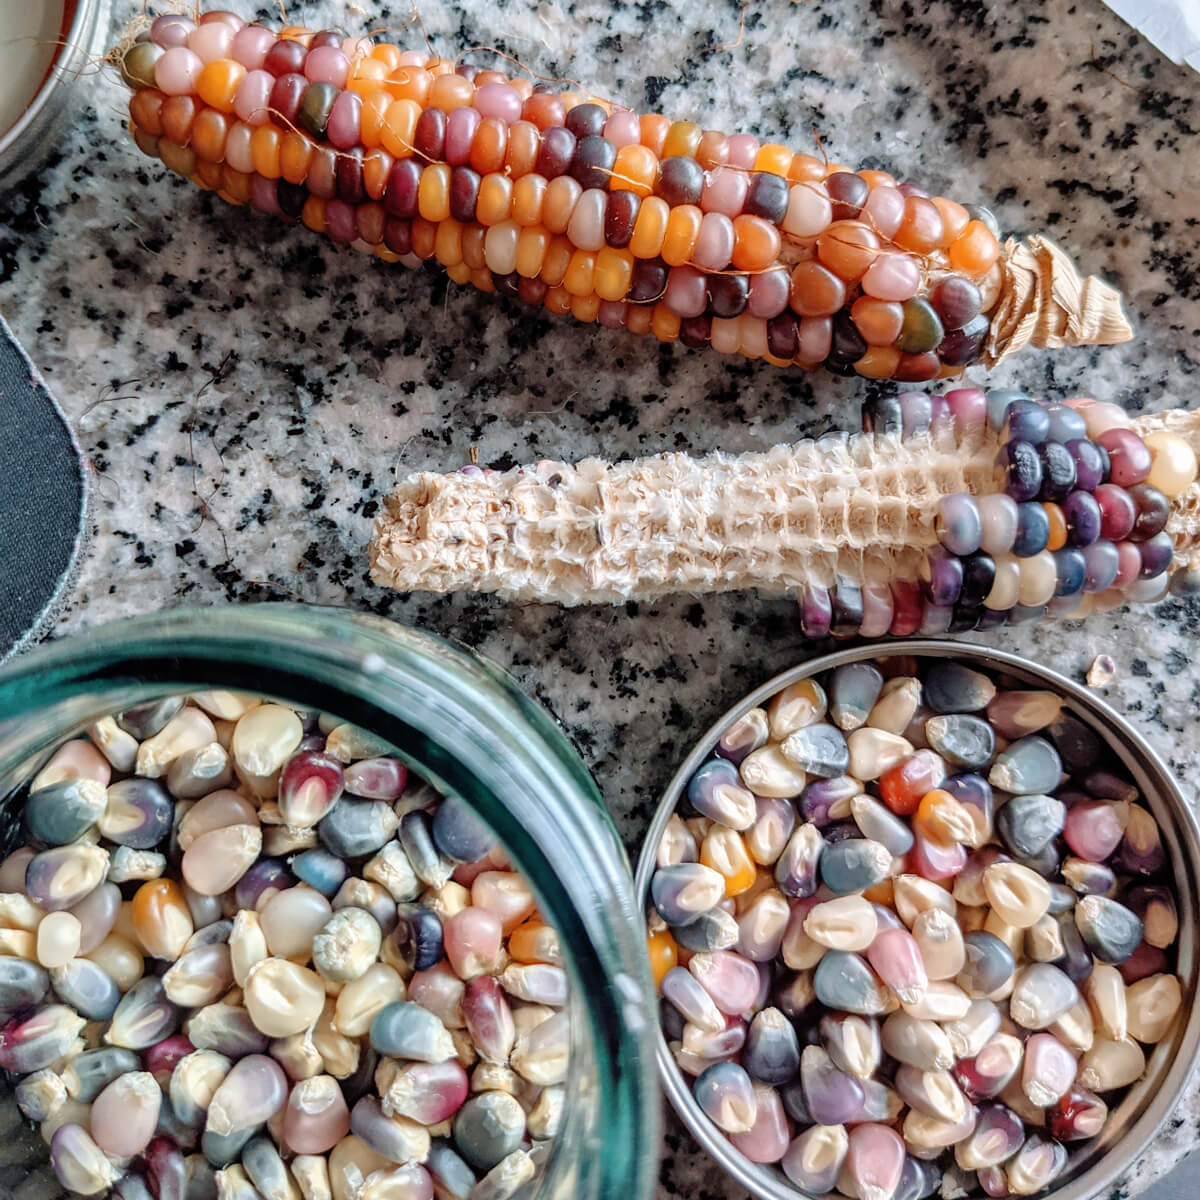 Saving popcorn kernels from homegrown plants - corn cobs and harvested seeds on table